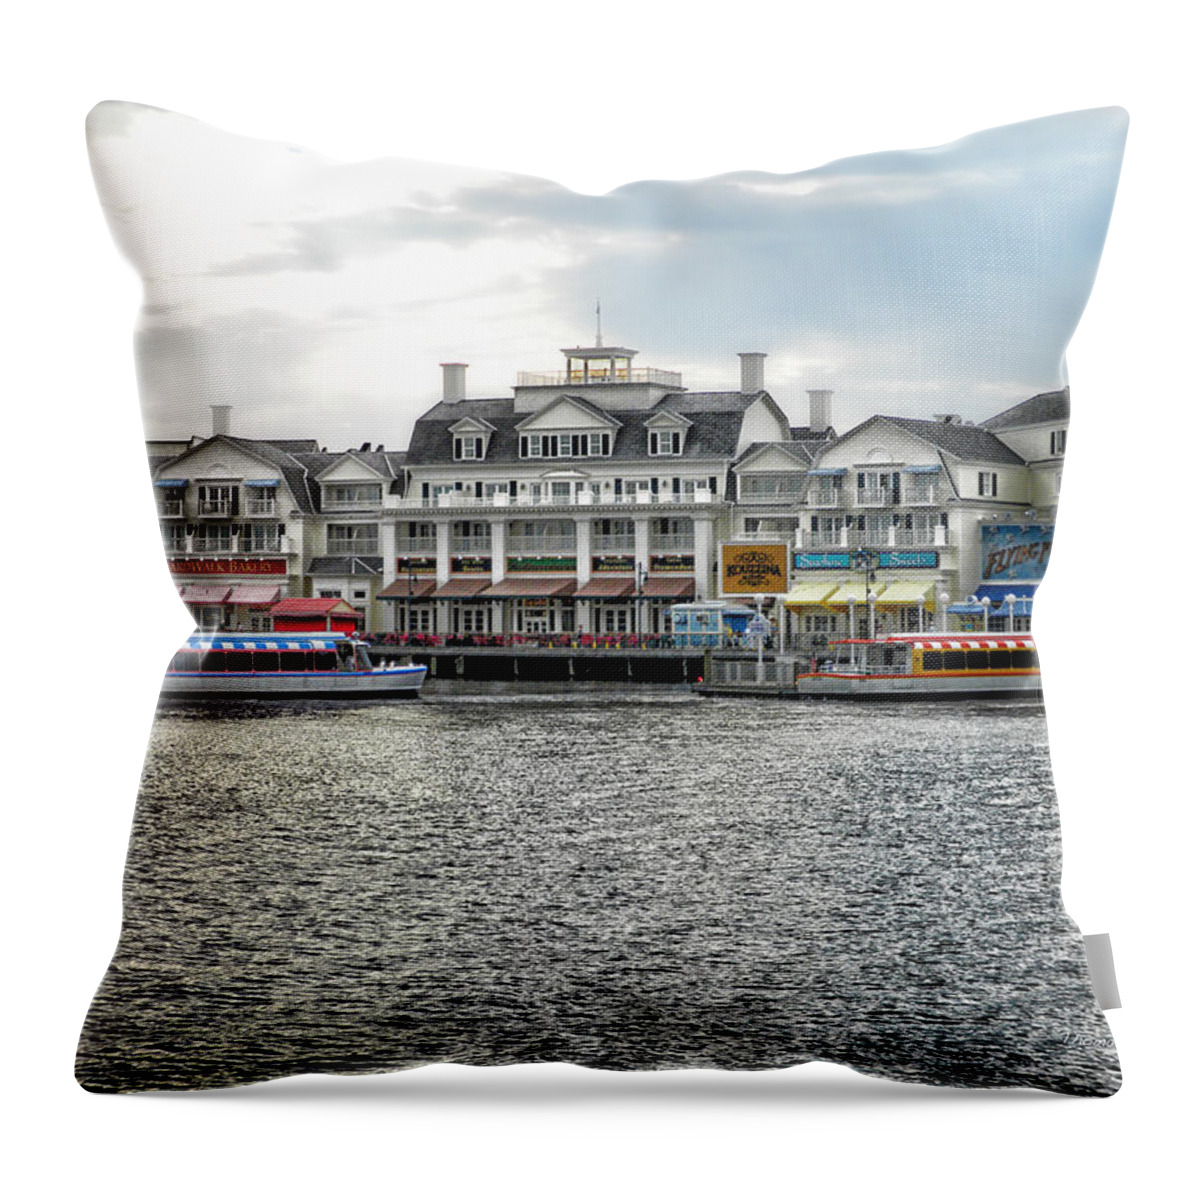 Boardwalk Throw Pillow featuring the photograph Docking At The Boardwalk Walt Disney World by Thomas Woolworth